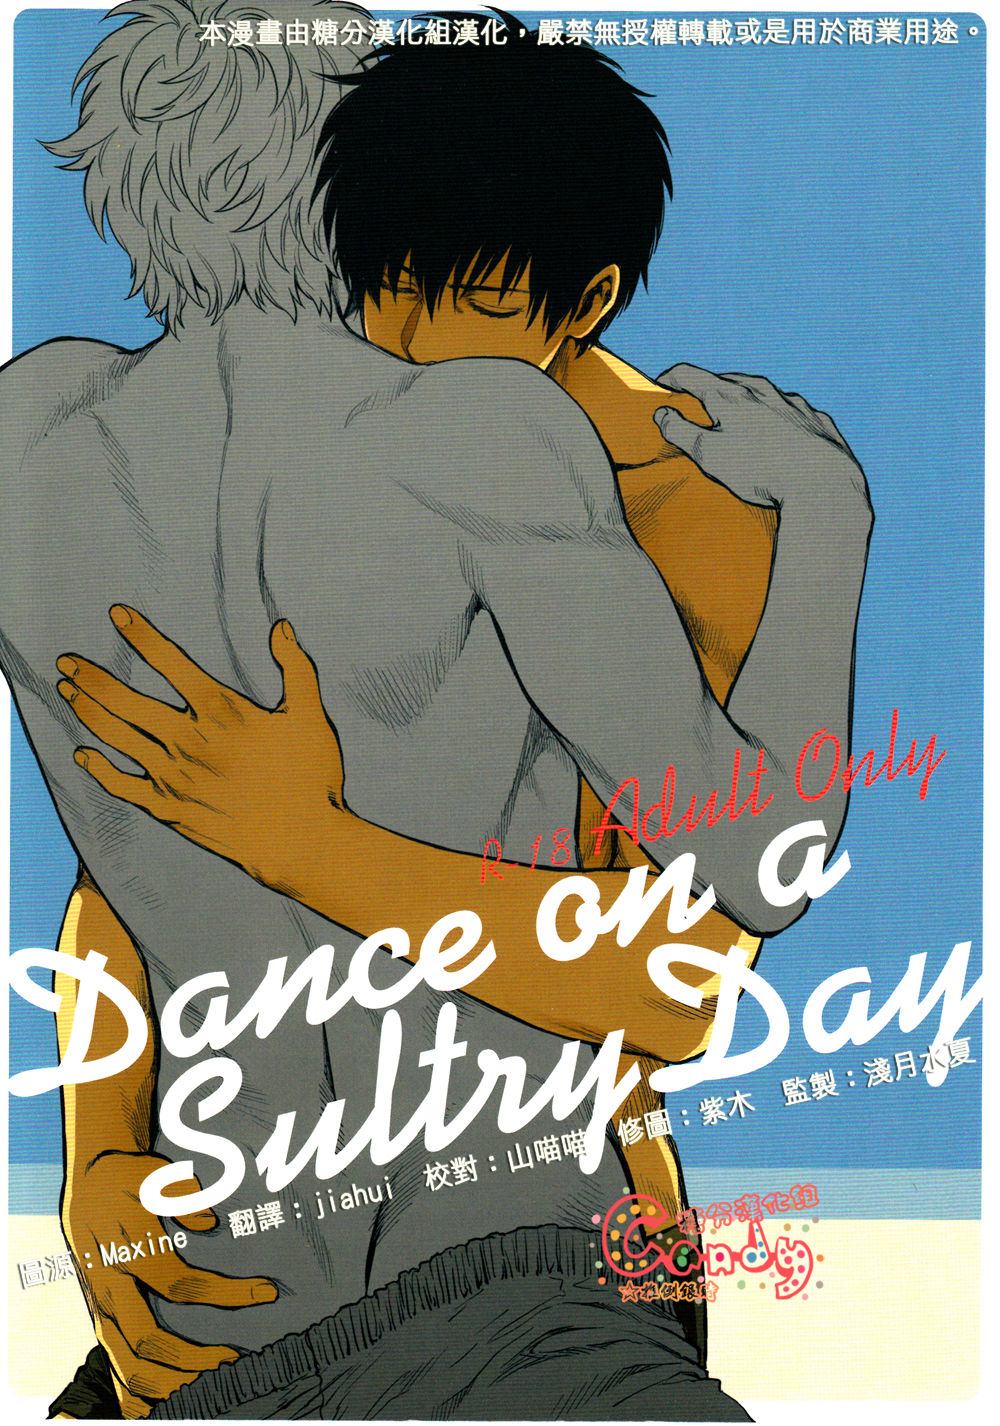 [3745HOUSE (Mikami Takeru)] Dance on a SultryDay (Gintama) [Chinese] [3745HOUSE (ミカミタケル)] Dance on a SultryDay (銀魂) [中文翻譯]